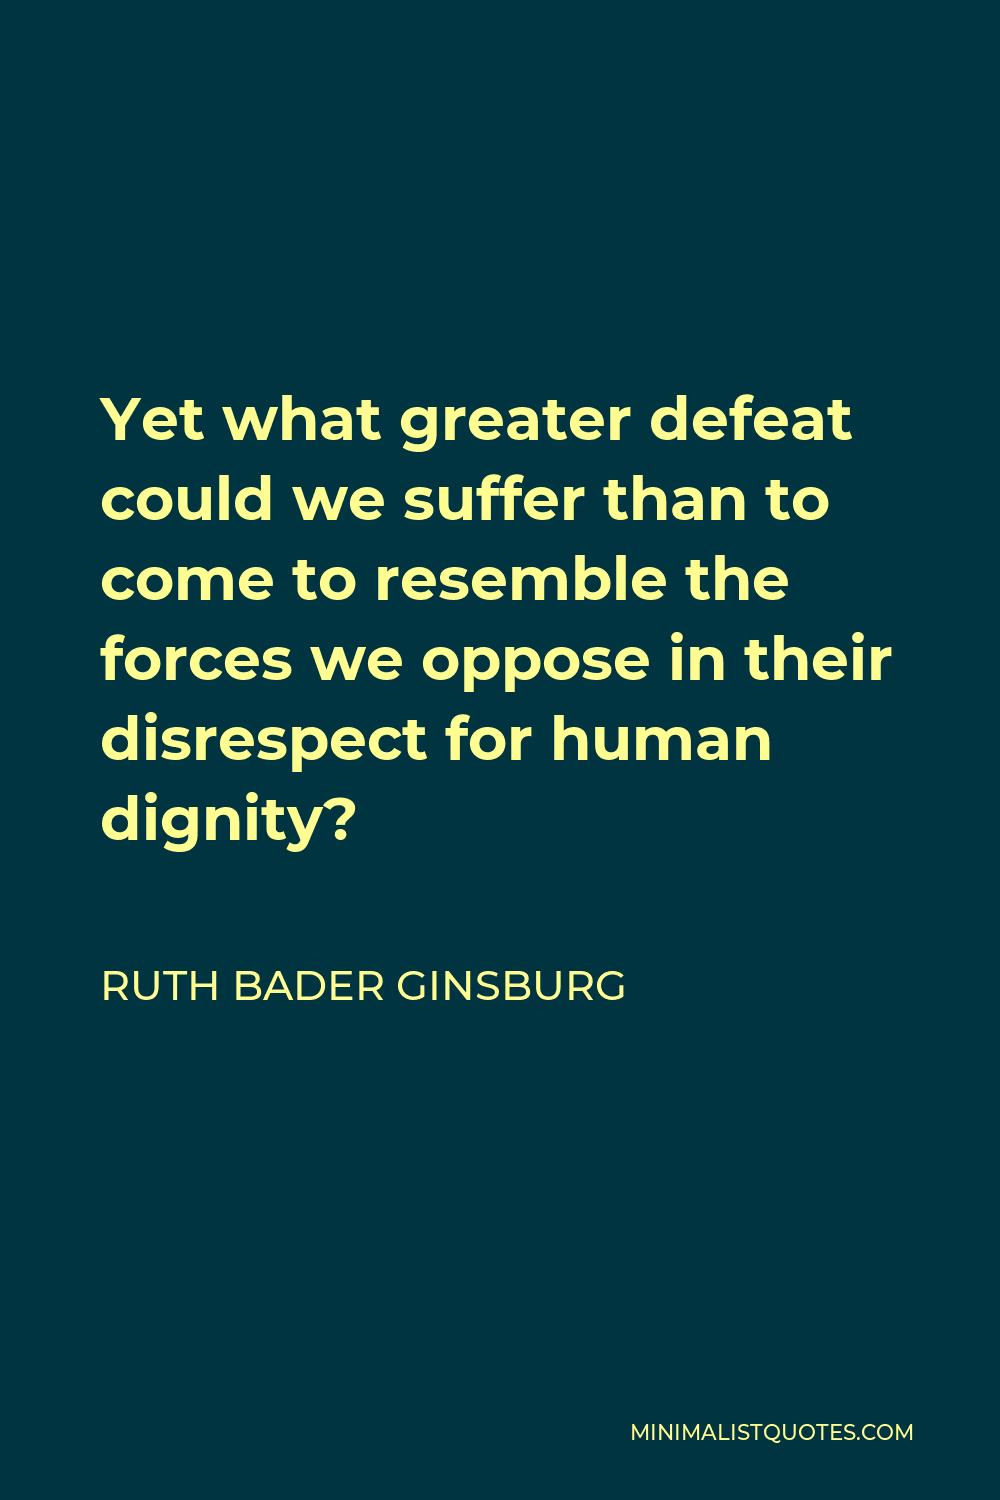 Ruth Bader Ginsburg Quote - Yet what greater defeat could we suffer than to come to resemble the forces we oppose in their disrespect for human dignity?